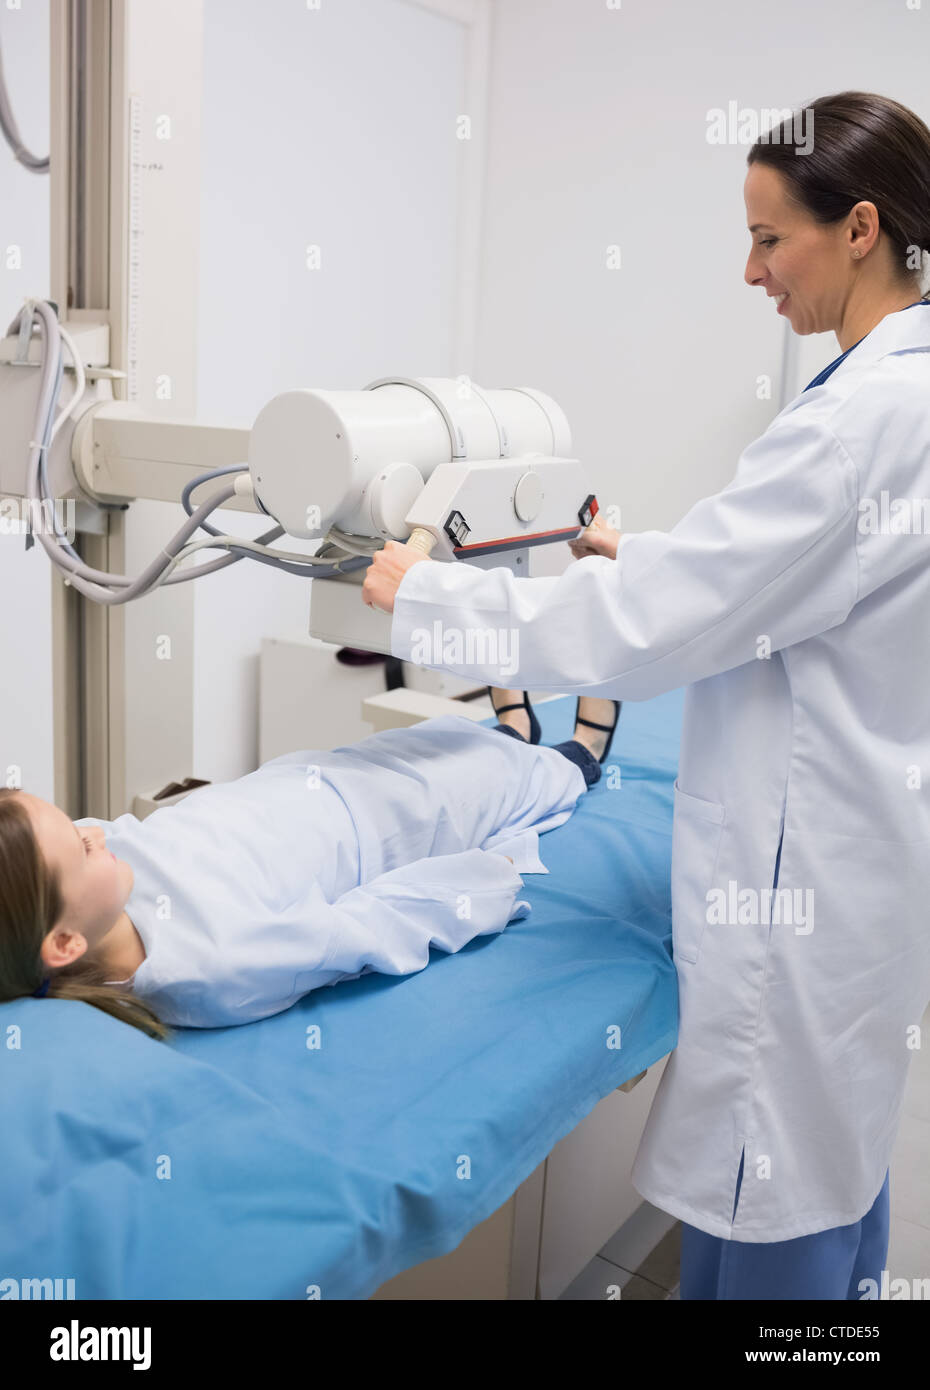 Female doctor doing a radiography on a patient Stock Photo